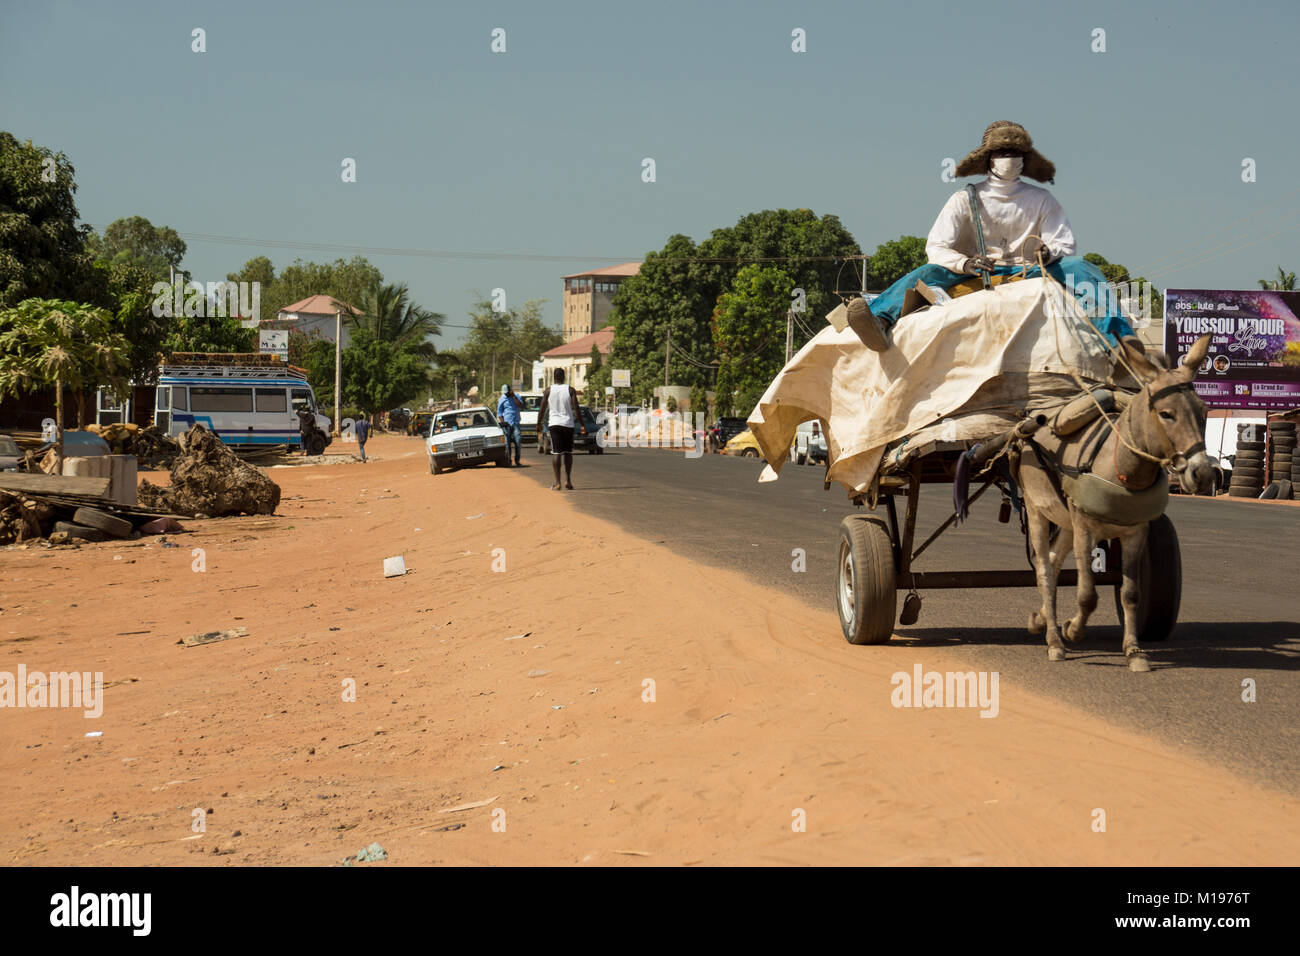 An african male rides a donkey and cart on a street in Senegambia, Gambia, Africa Stock Photo